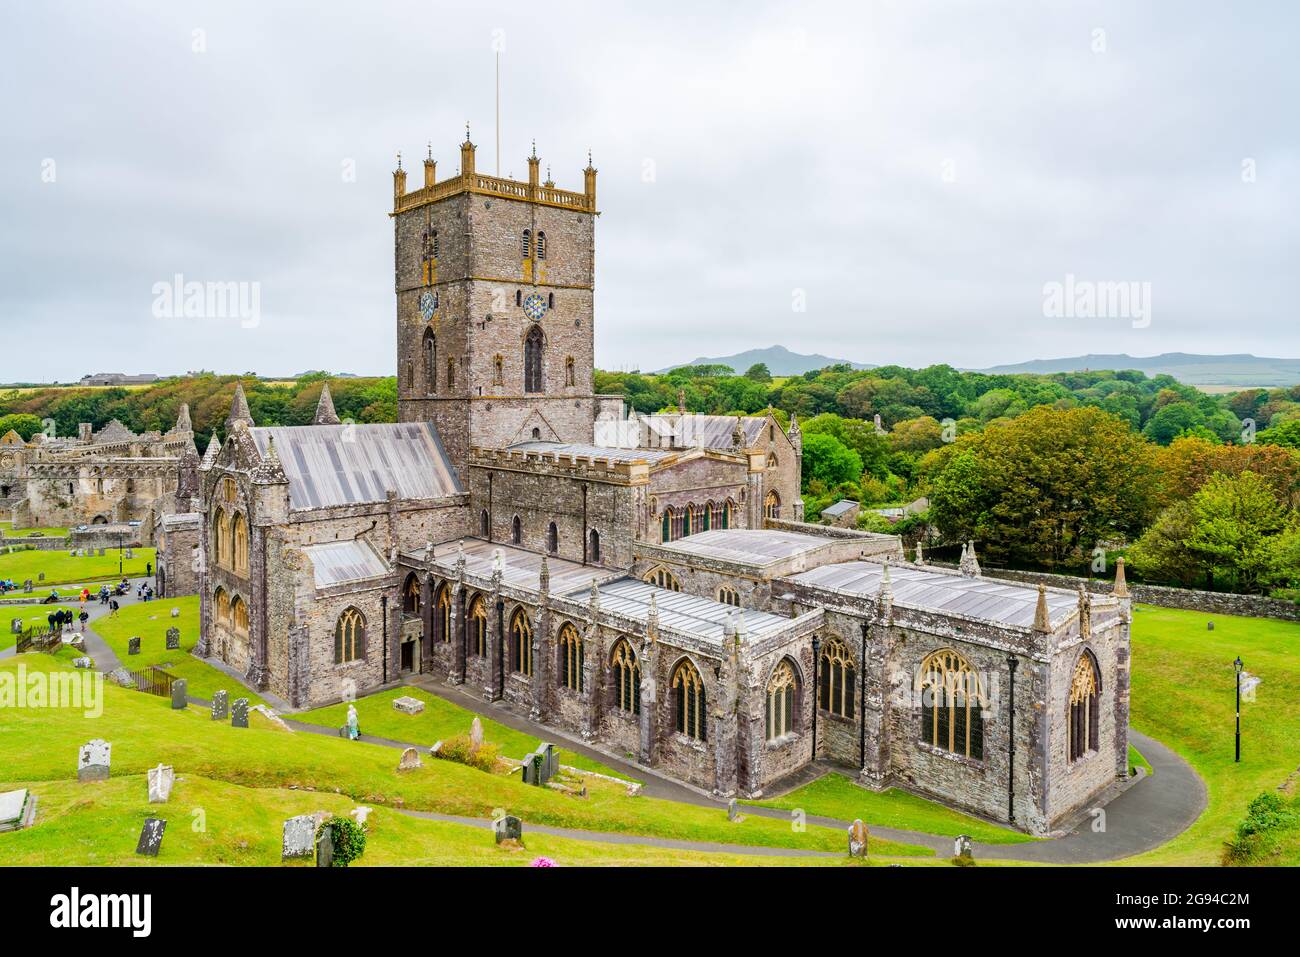 ST DAVIDS, WALES - JUNE 29, 2021: St Davids Cathedral is situated in St Davids city in the county of Pembrokeshire, Stock Photo